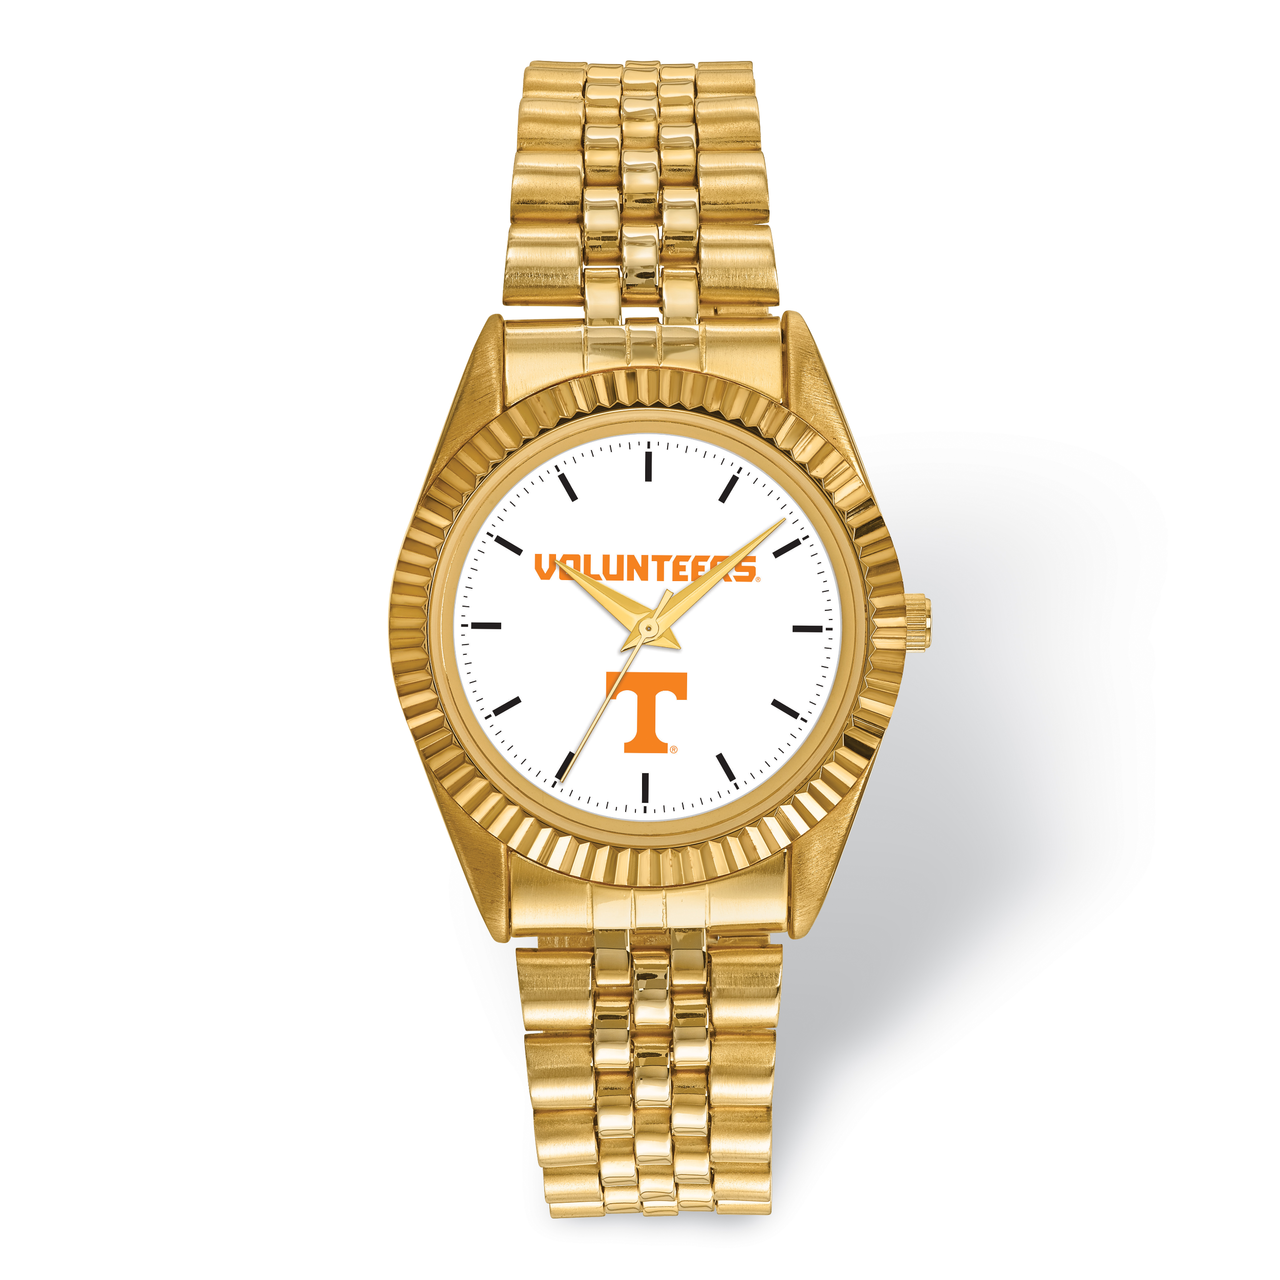 University of Tennessee Knoxville Pro Gold-tone Mens Watch UTN166